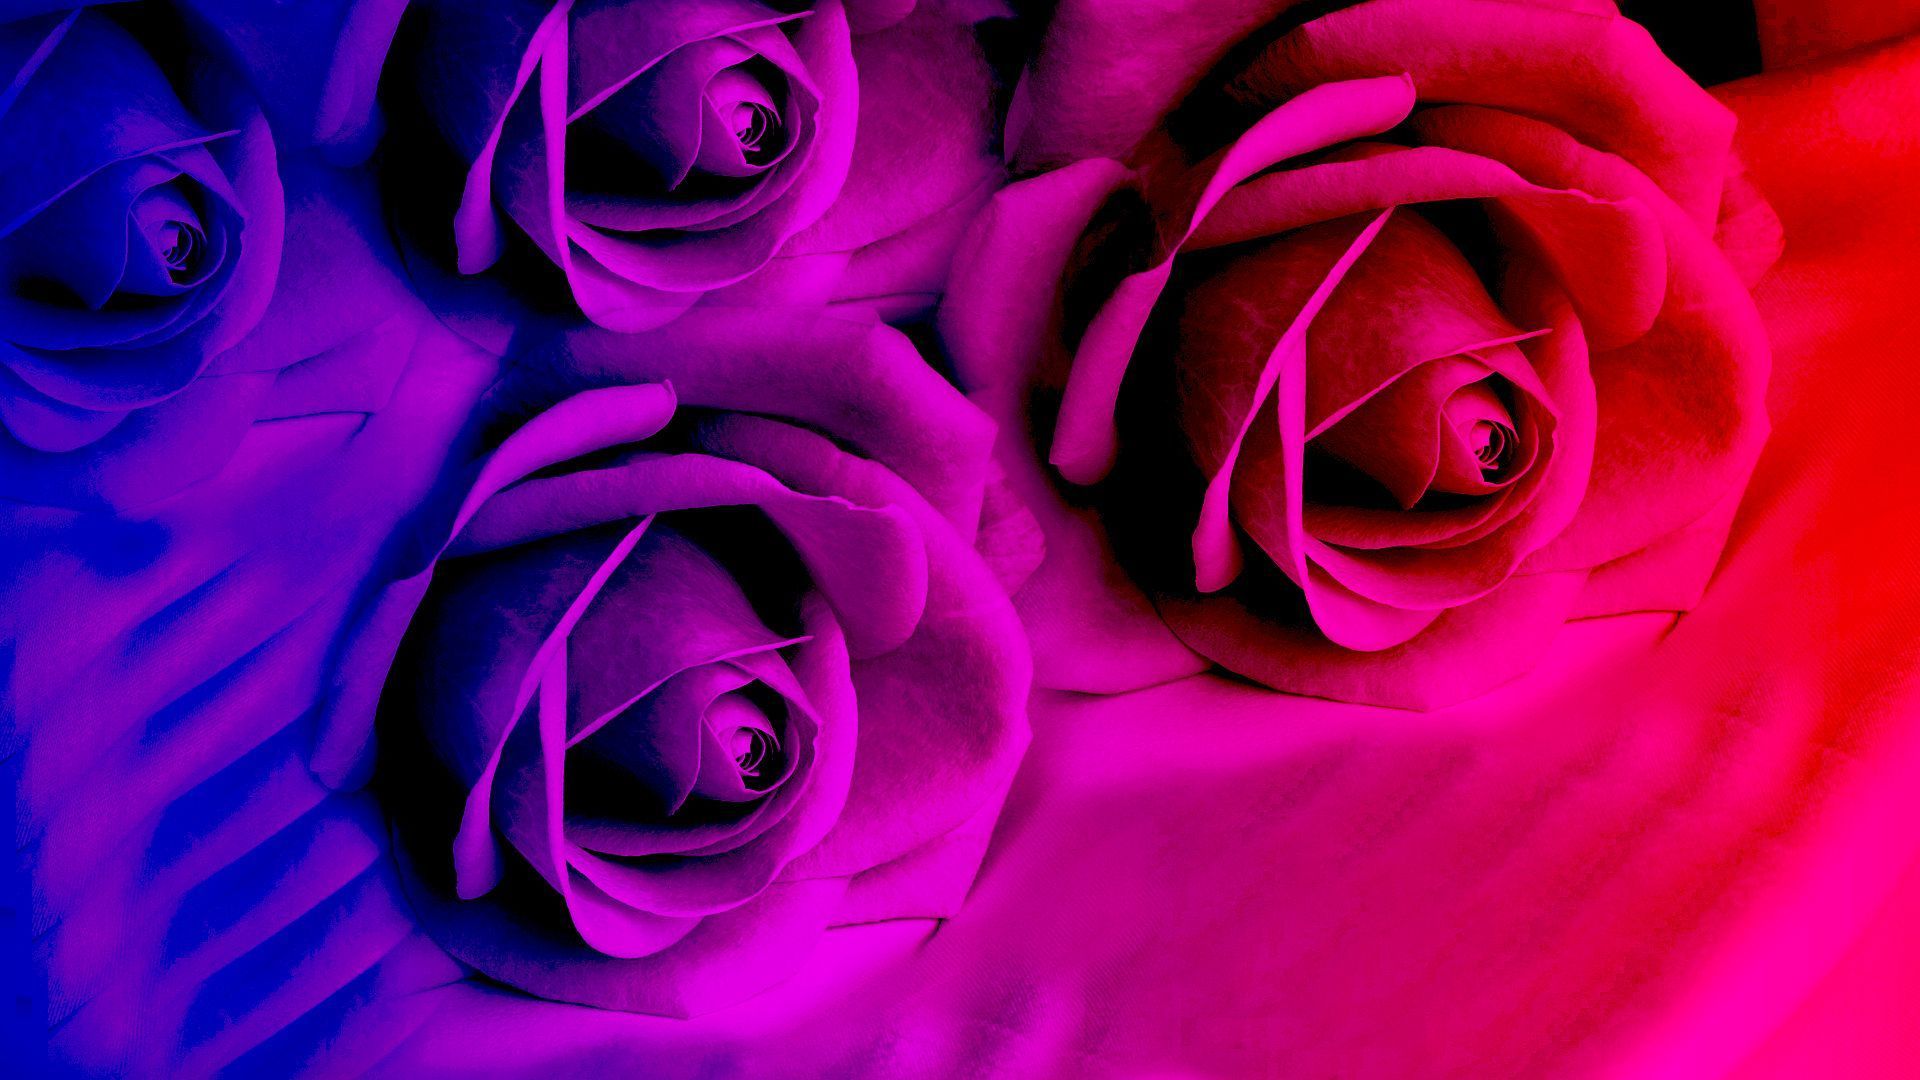 Pink I Love You Live Wallpaper Free Download Of Android - Violet Color Wallpaper Hd - HD Wallpaper 